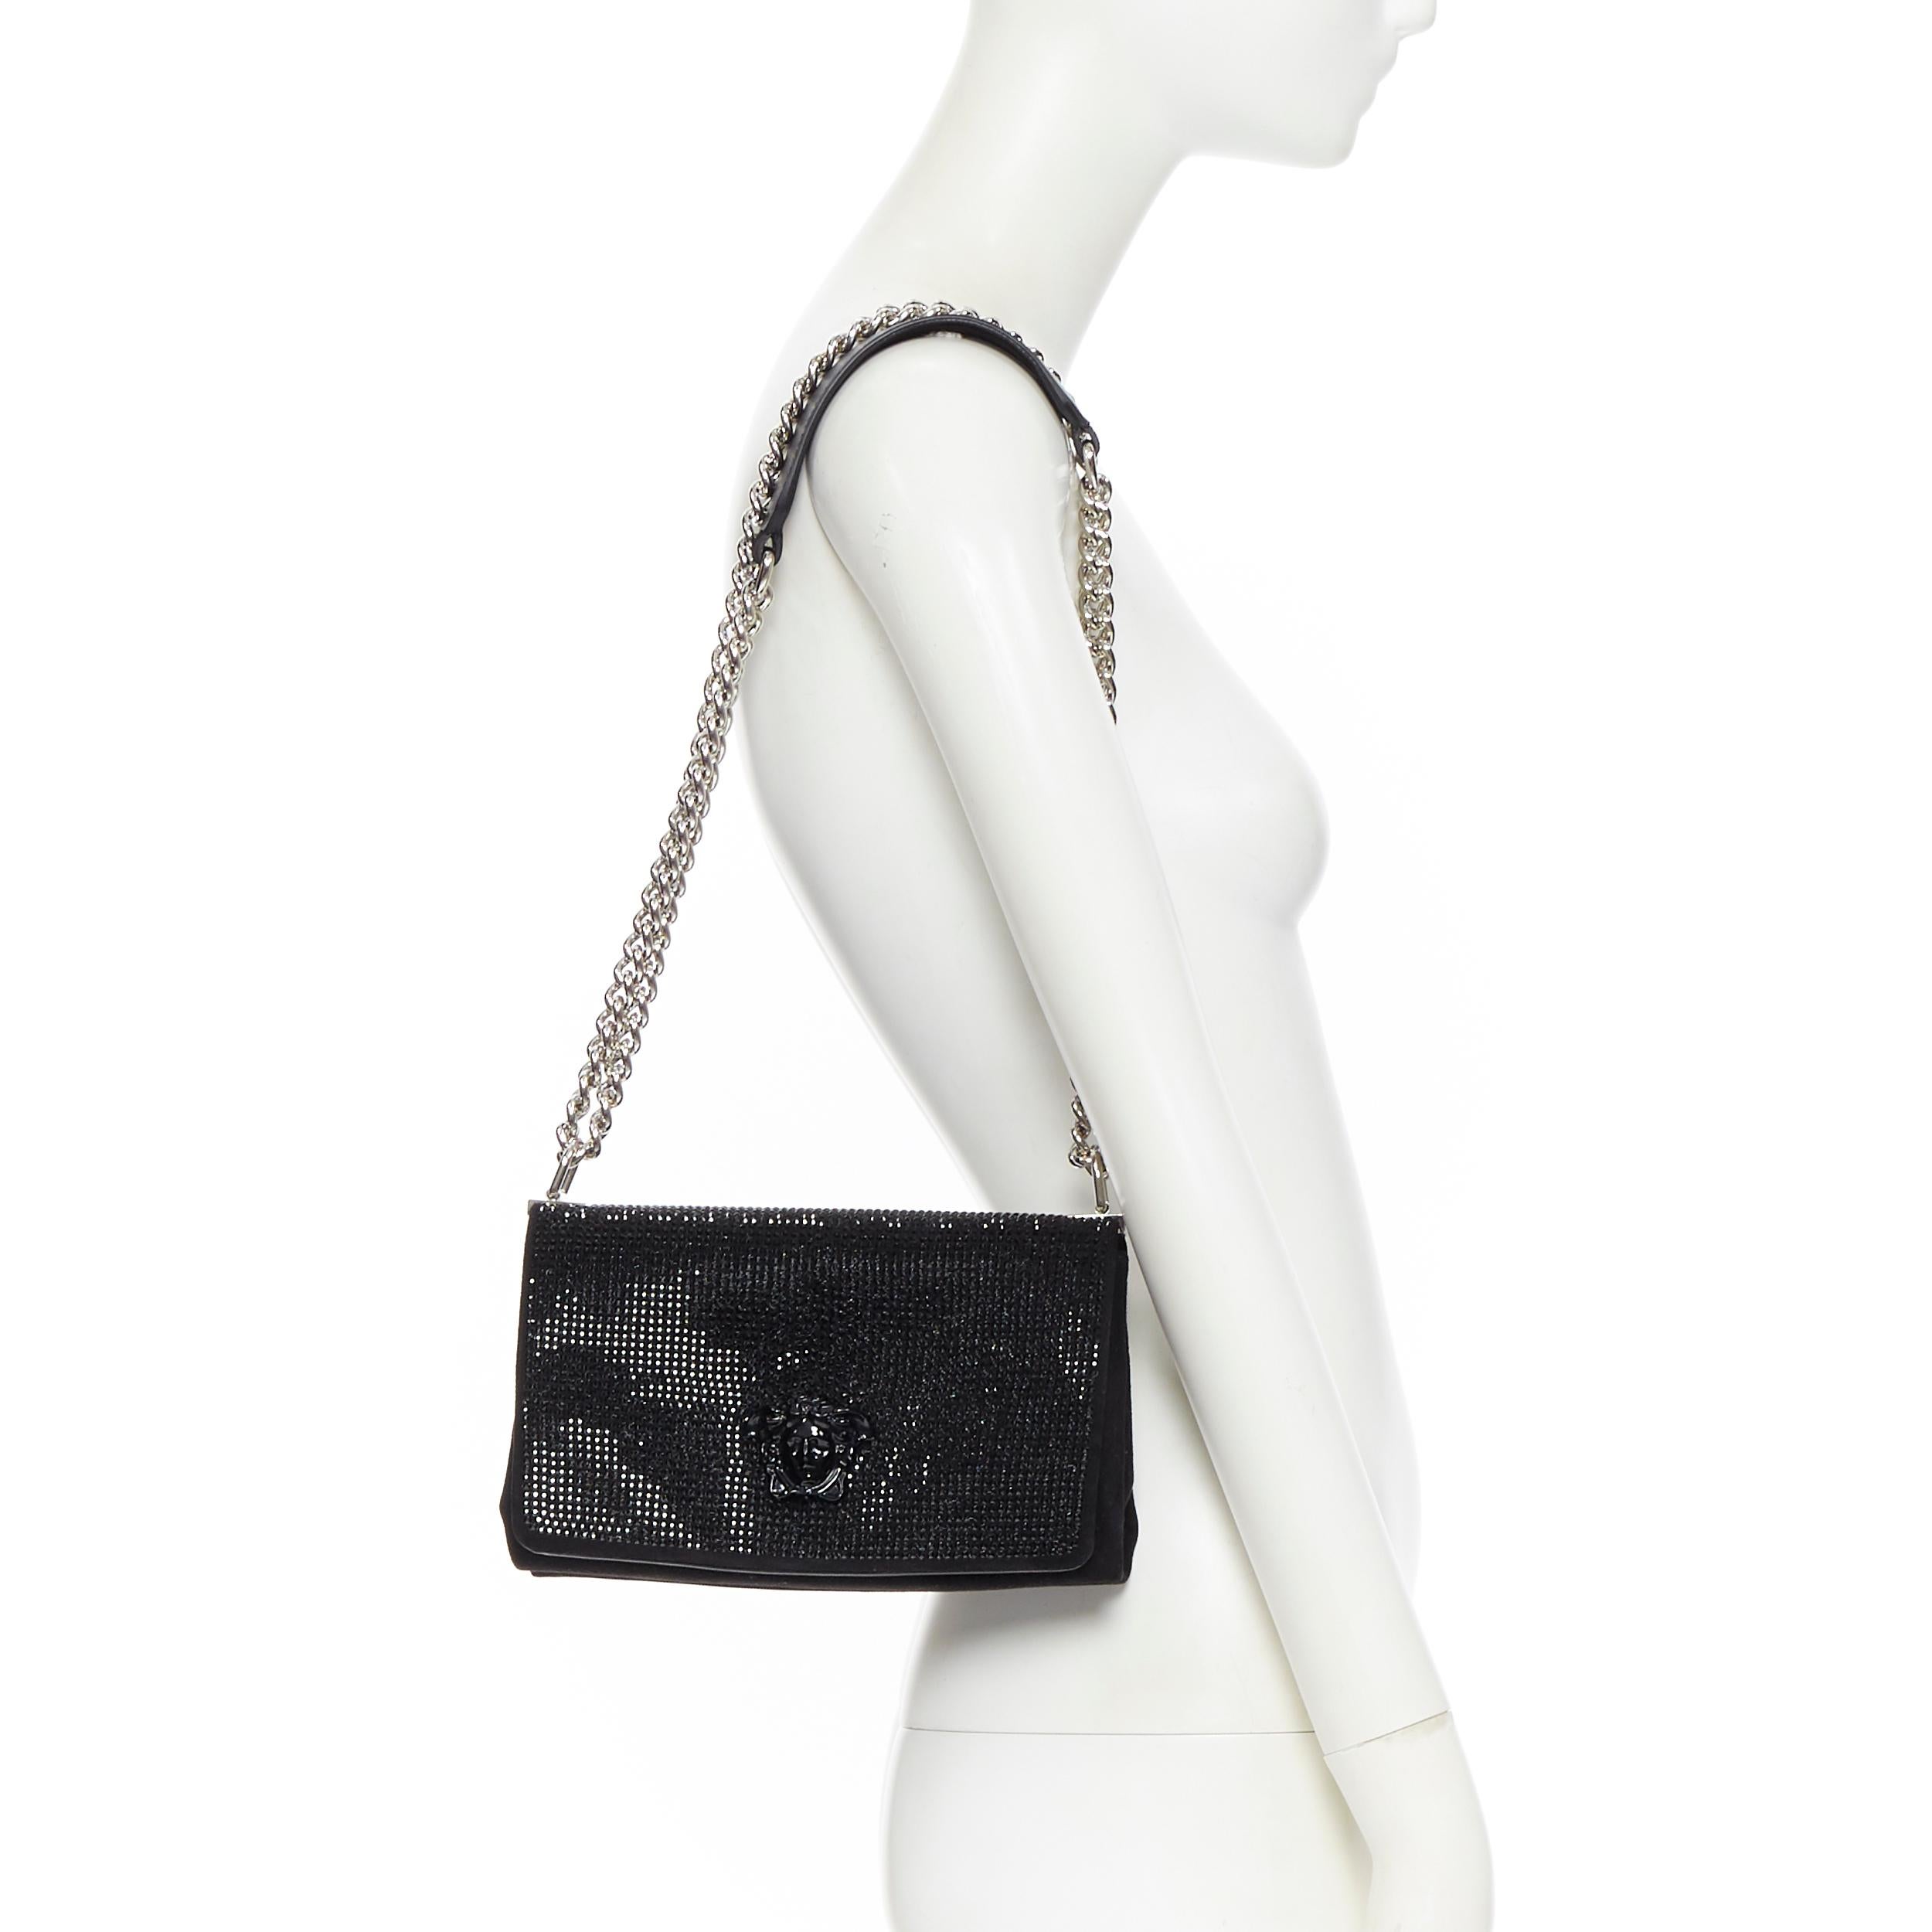 new VERSACE Palazzo Medusa black strass crystal flap chunky chain shoulder bag 
Brand: Versace
Designer: Donatella Versace
Model Name / Style: Palazzo Medusa
Material: Suede
Color: Black
Pattern: Solid
Closure: Magnetic
Extra Detail: Suede leather